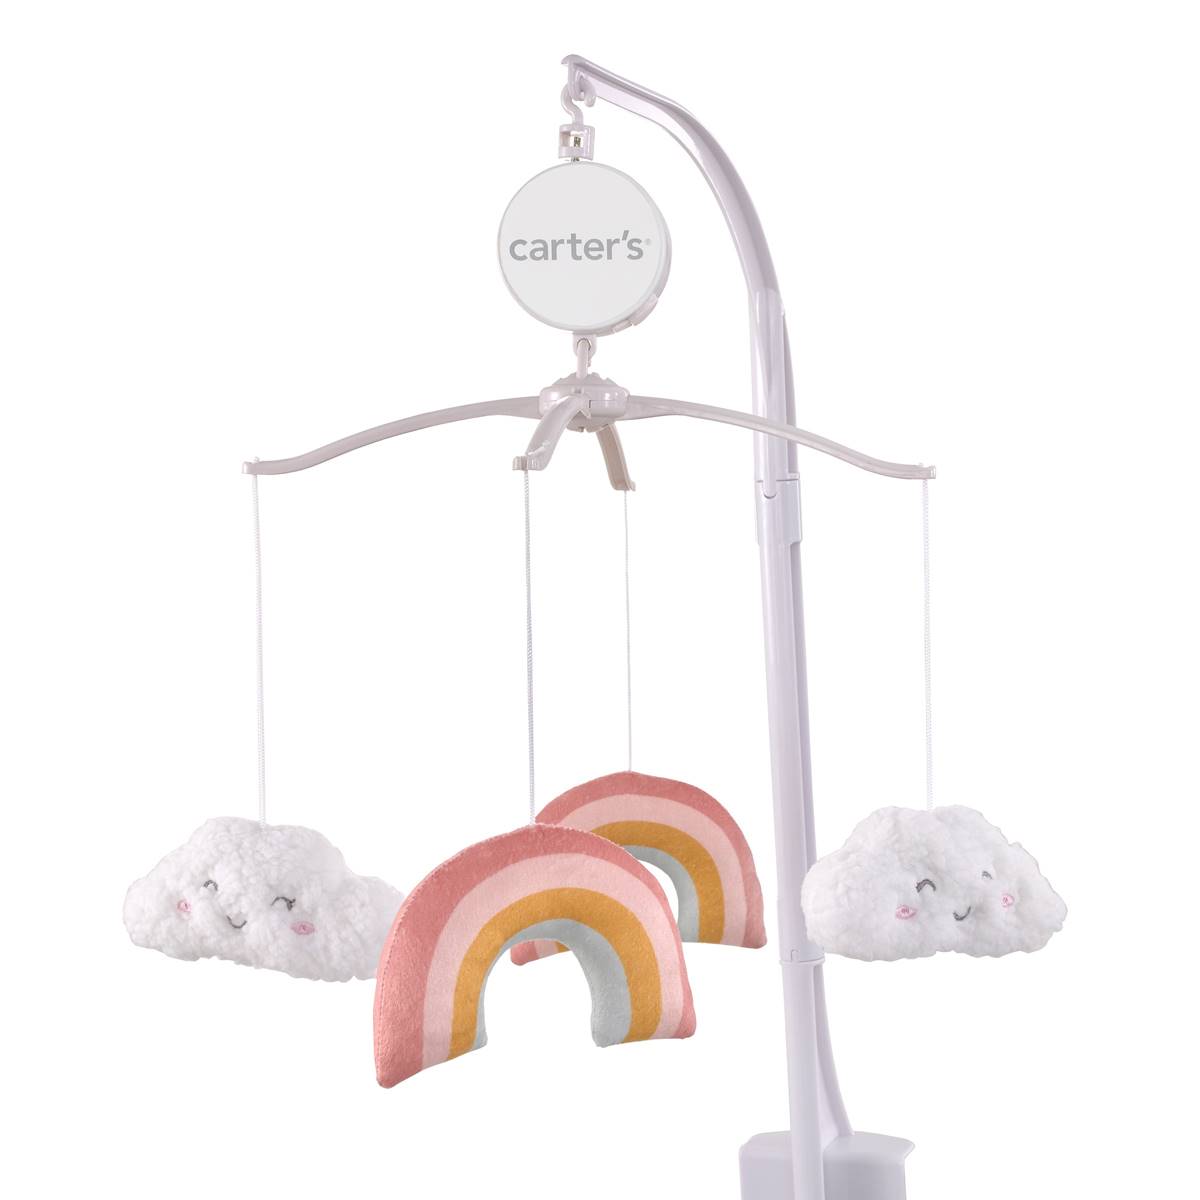 Carters(R) Chasing Rainbows Musical Mobile